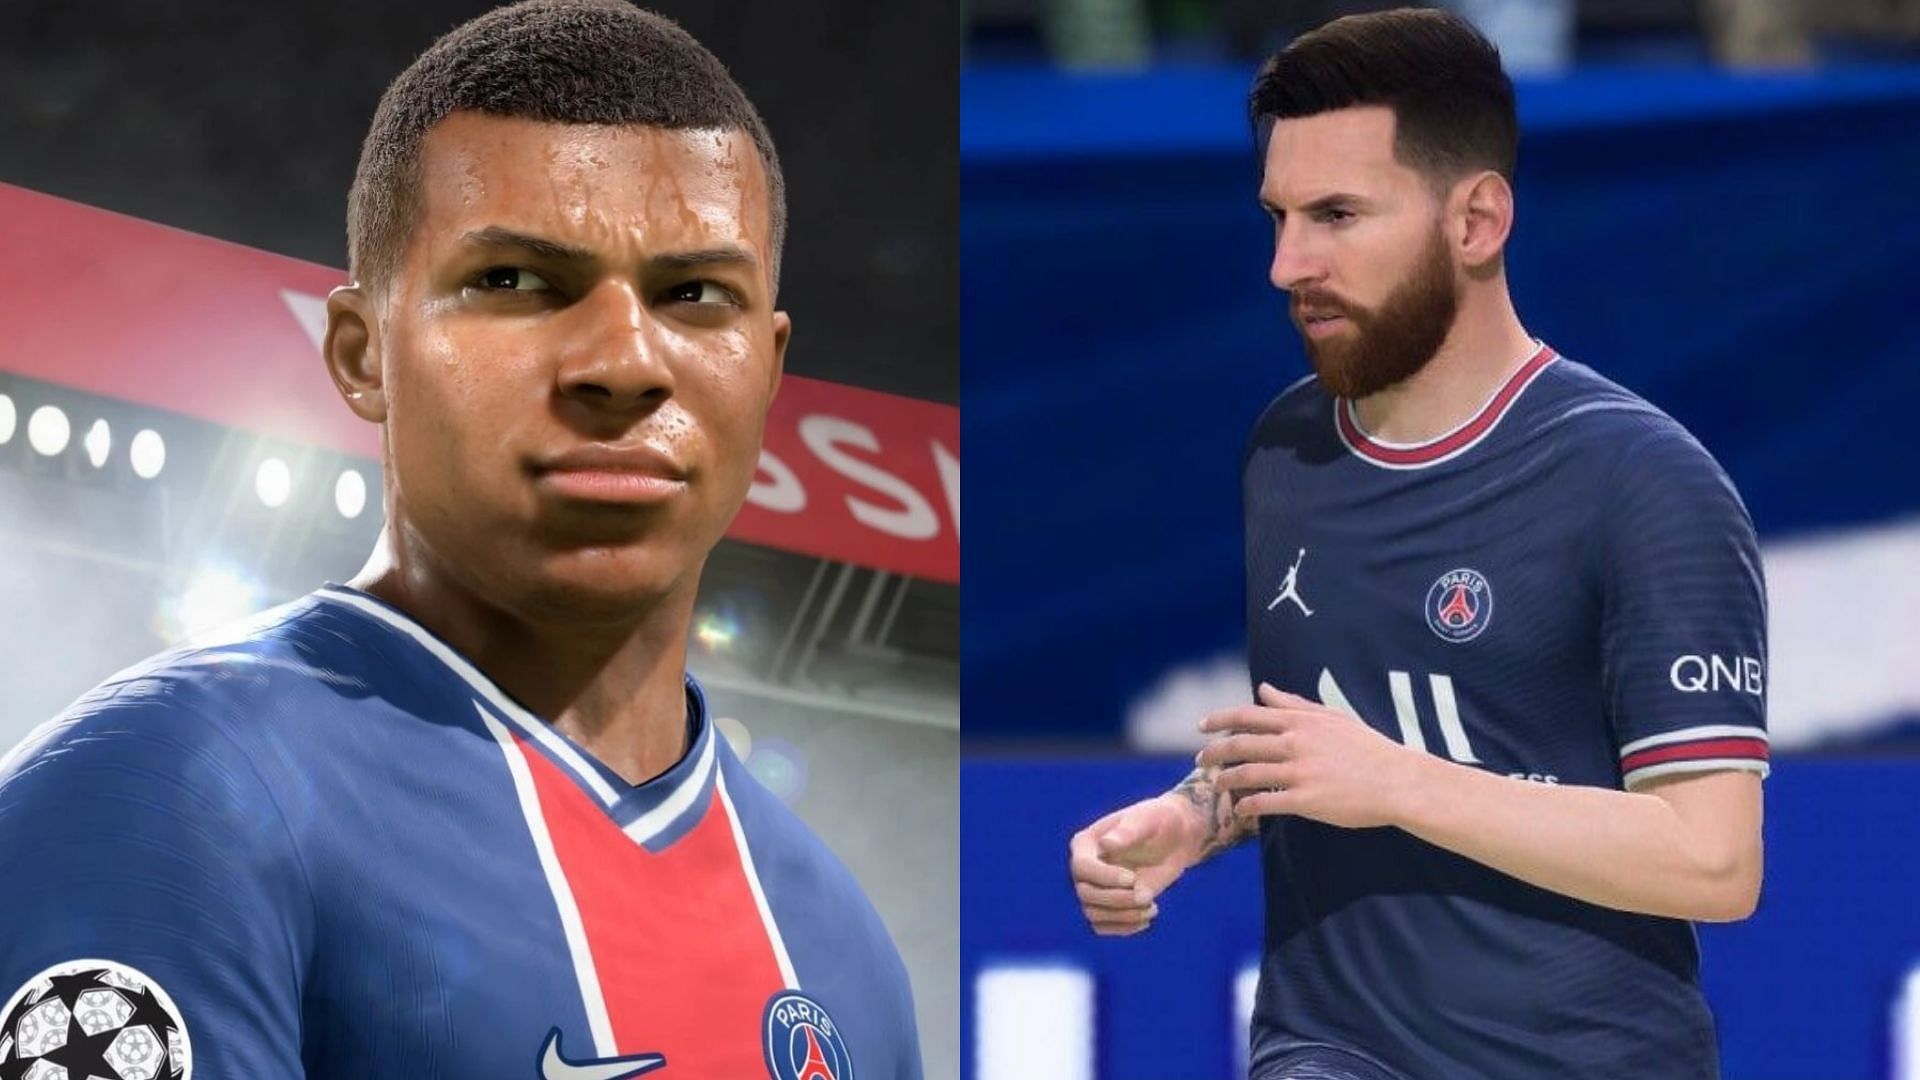 FIFA 23 top player ratings leaked, with Lionel Messi and Kylian